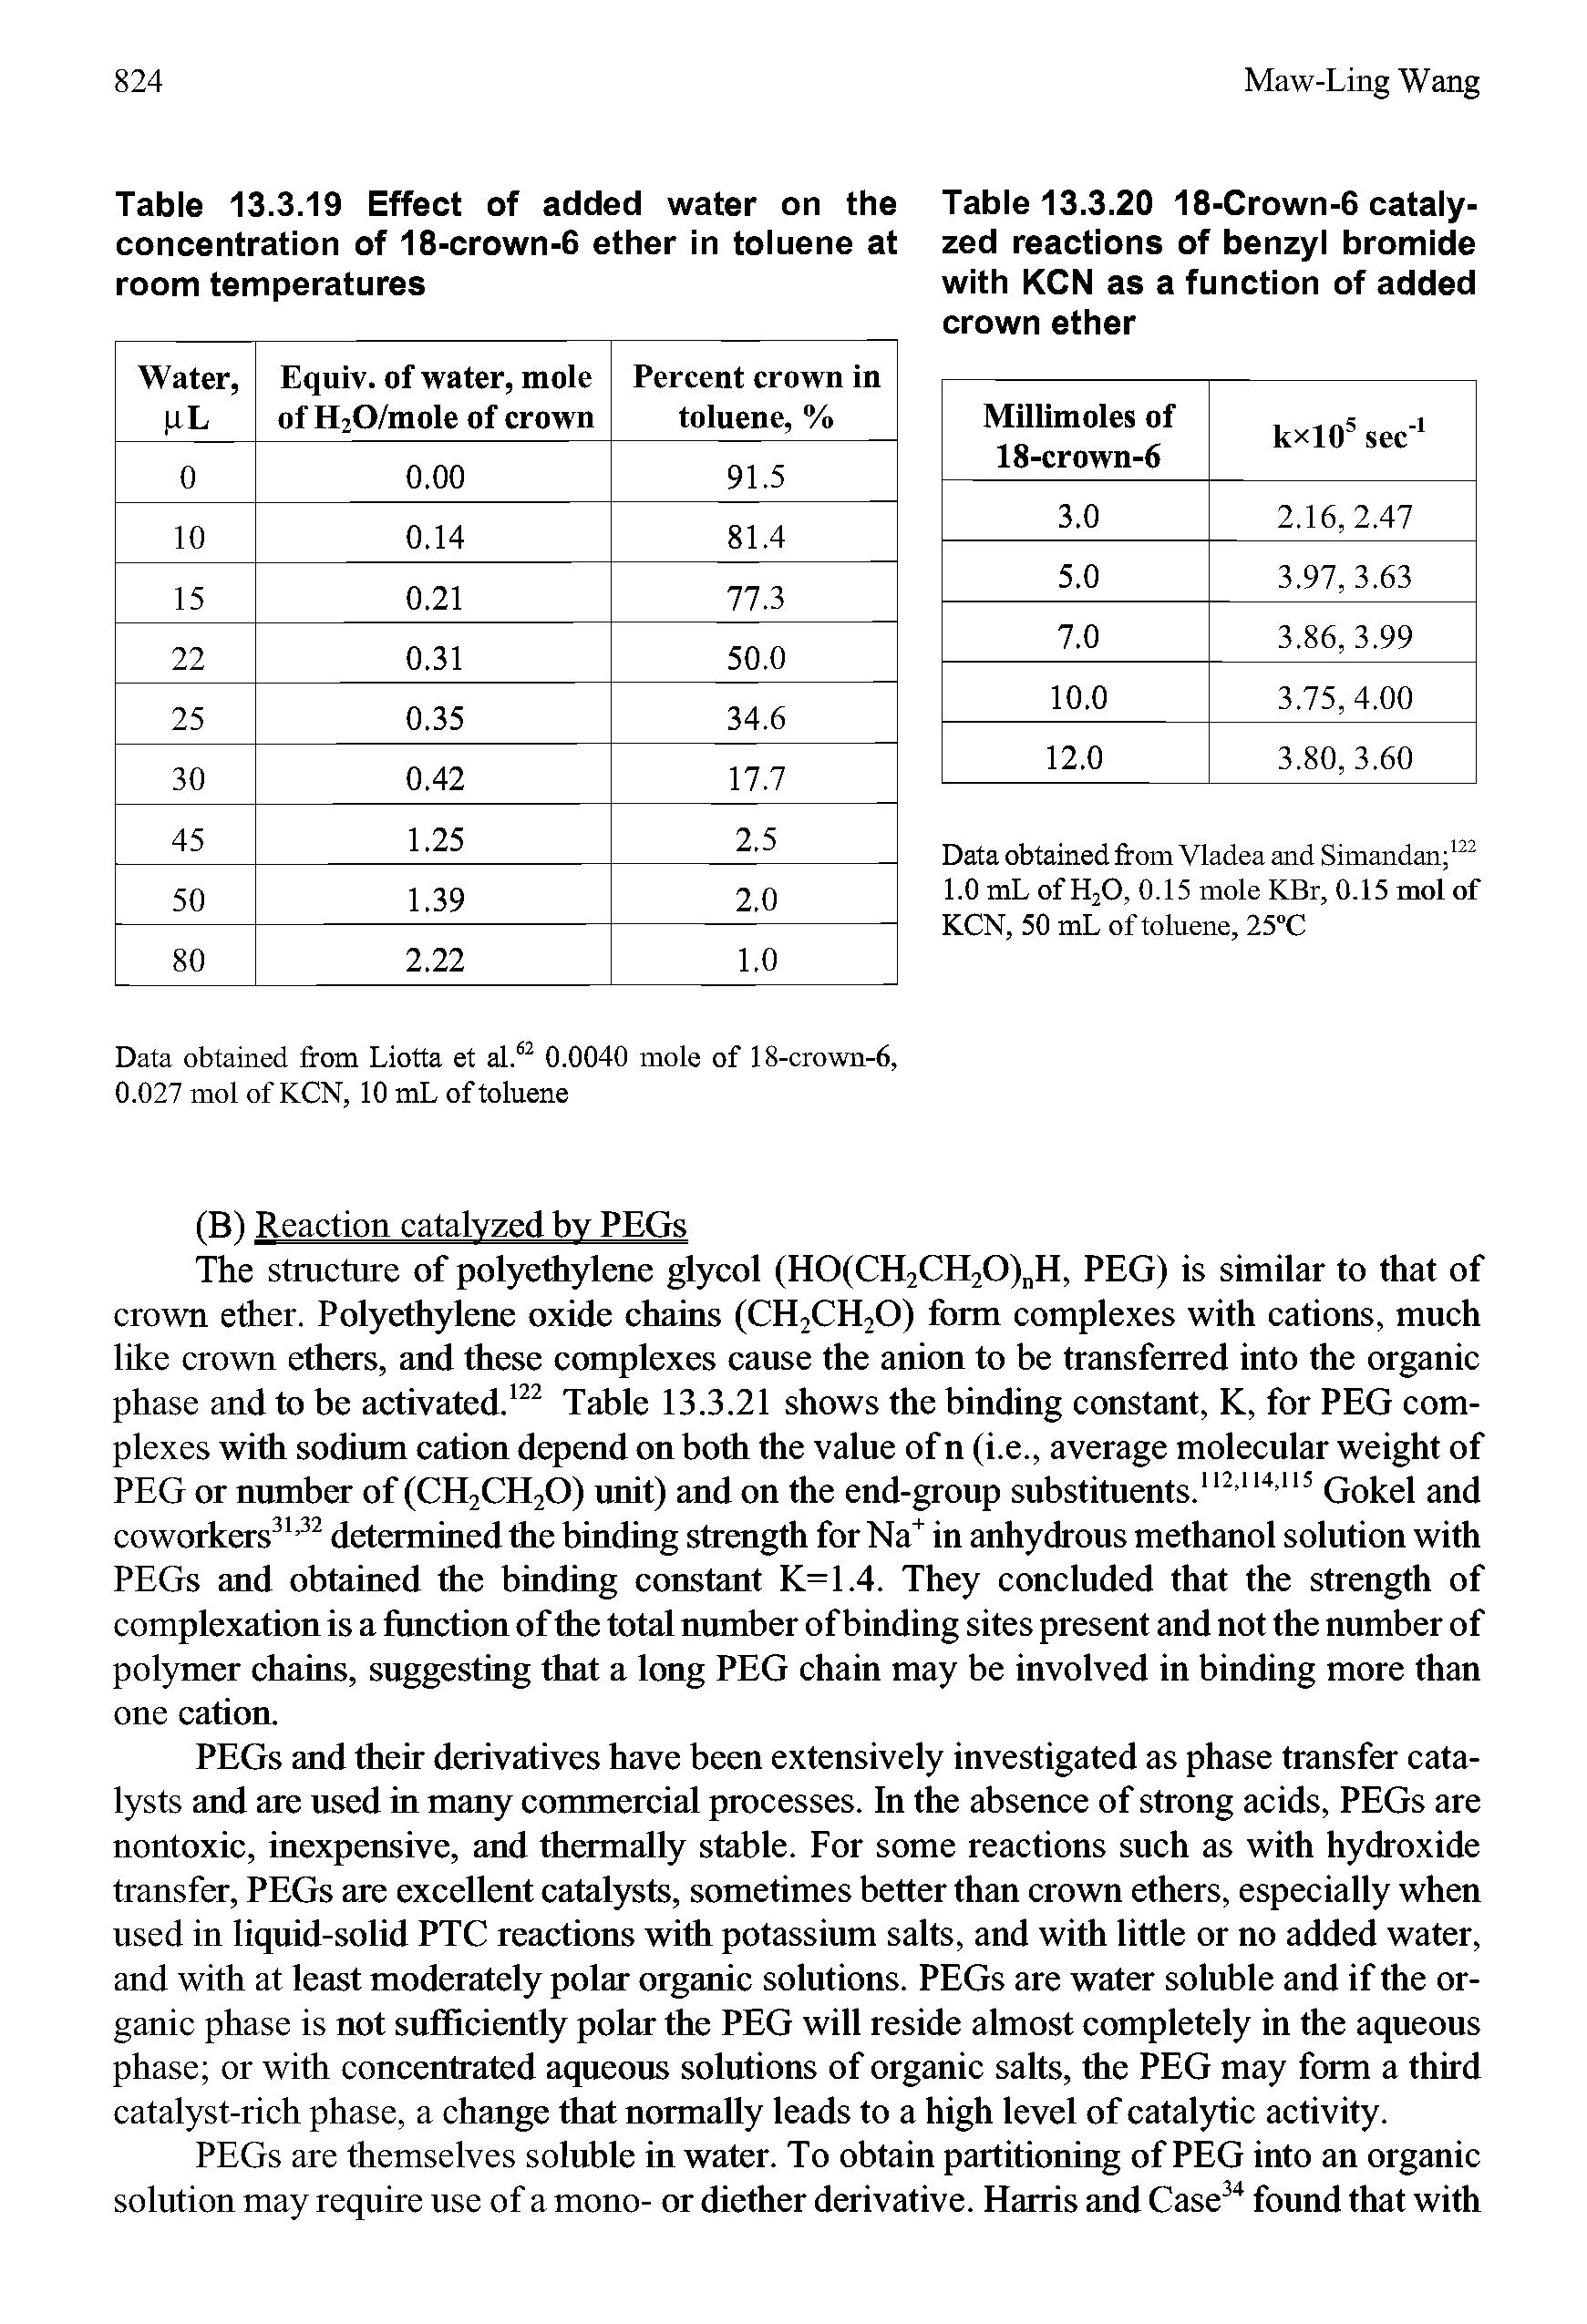 Table 13.3.19 Effect of added water on the concentration of 18-crown-6 ether in toluene at room temperatures...